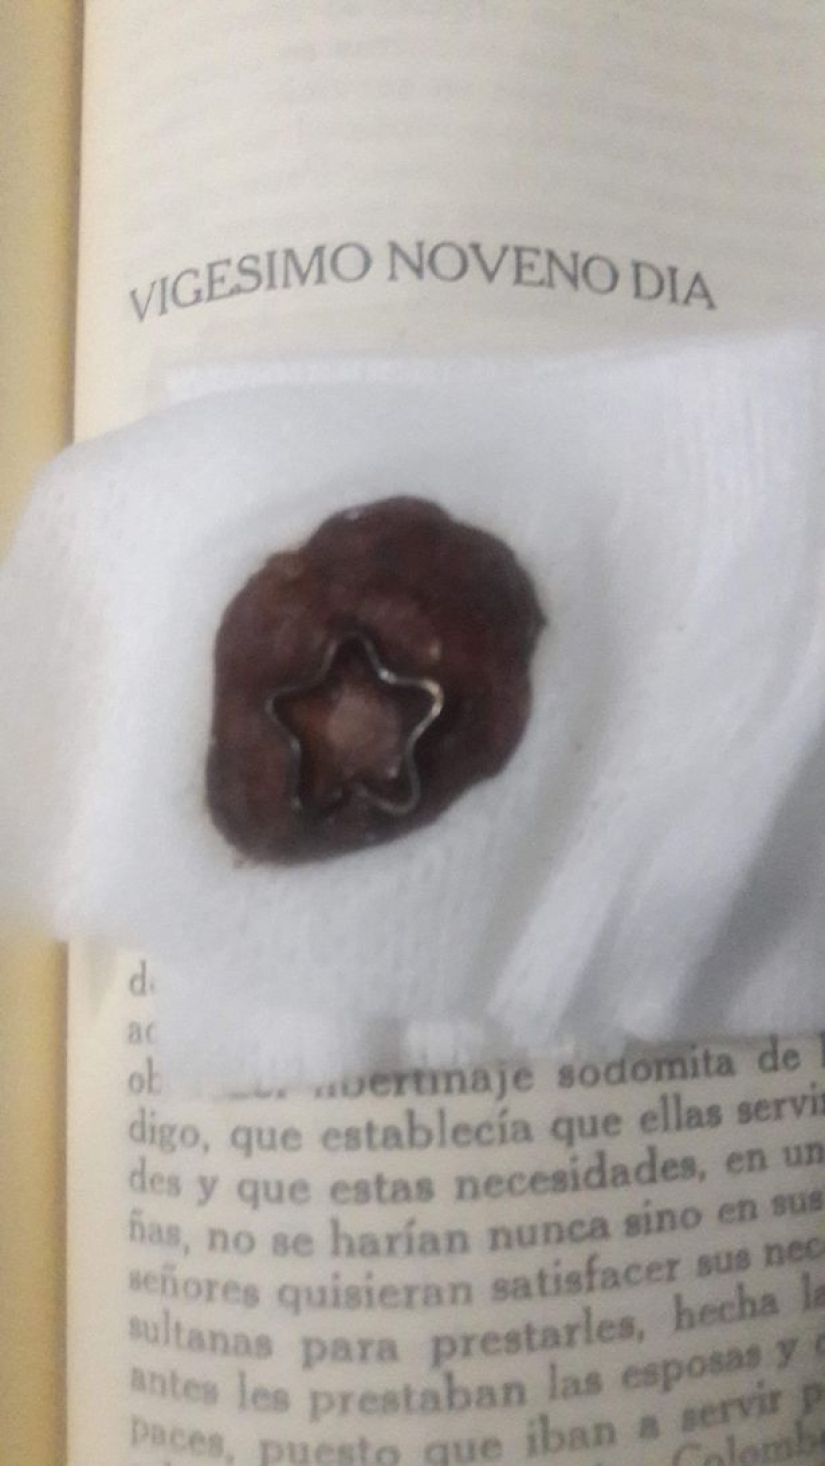 "Honey, this is for you": A 23-year-old girl removed her navel and gave it to her boyfriend